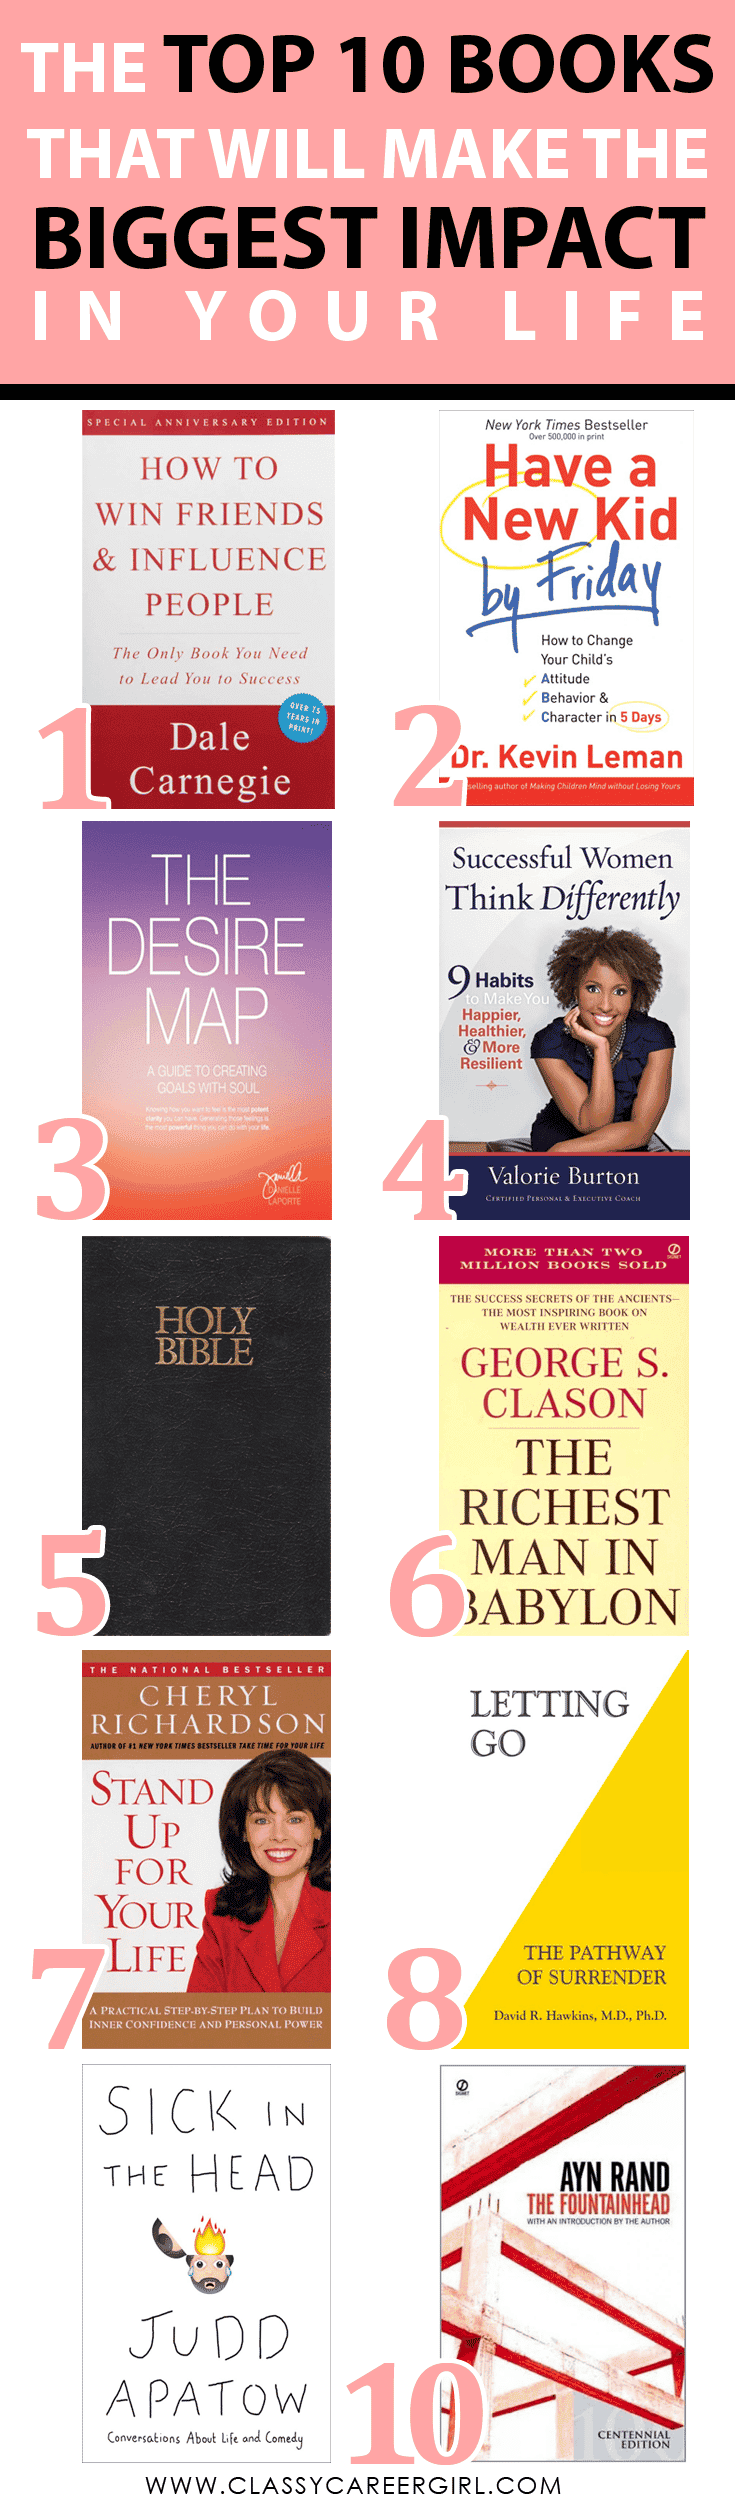 The Top 10 Books That Will Make the Biggest Impact in Your Life